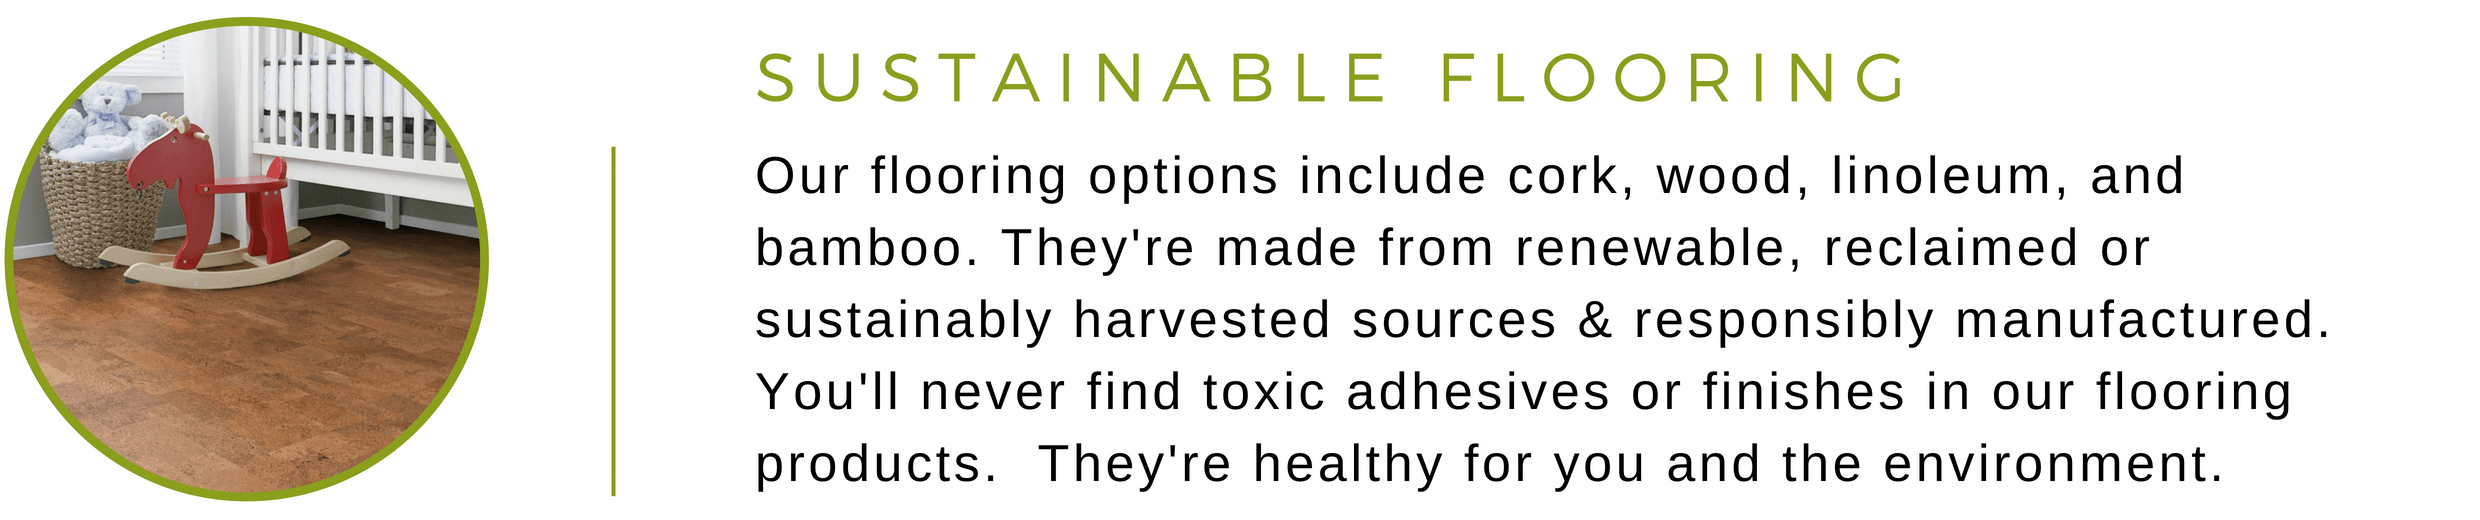 Our sustainable flooring is made from renewable, reclaimed, or sustainably harvested sources and are responsibly manufactured. They're healthy for you and the environment.